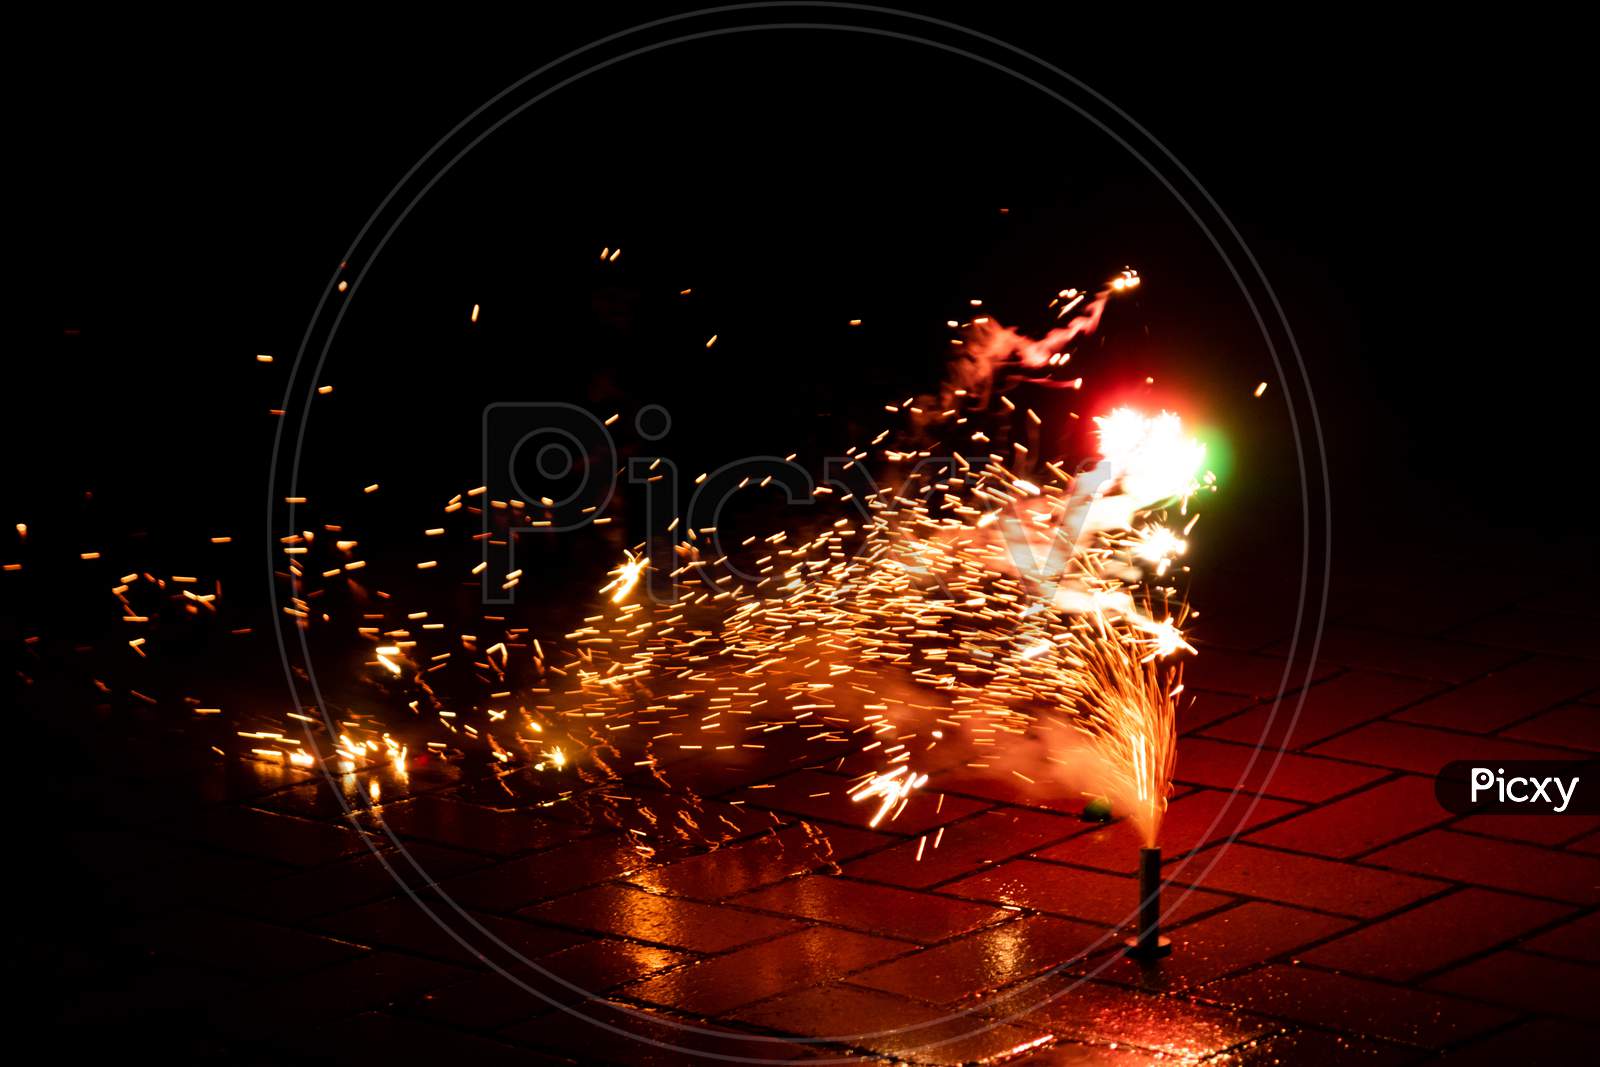 Colorful fireworks illuminates the silvester night with firecrackers, bangers and explosive pyrotechnics and fountains of light to celebrate into a happy new year on a silvester party with friends